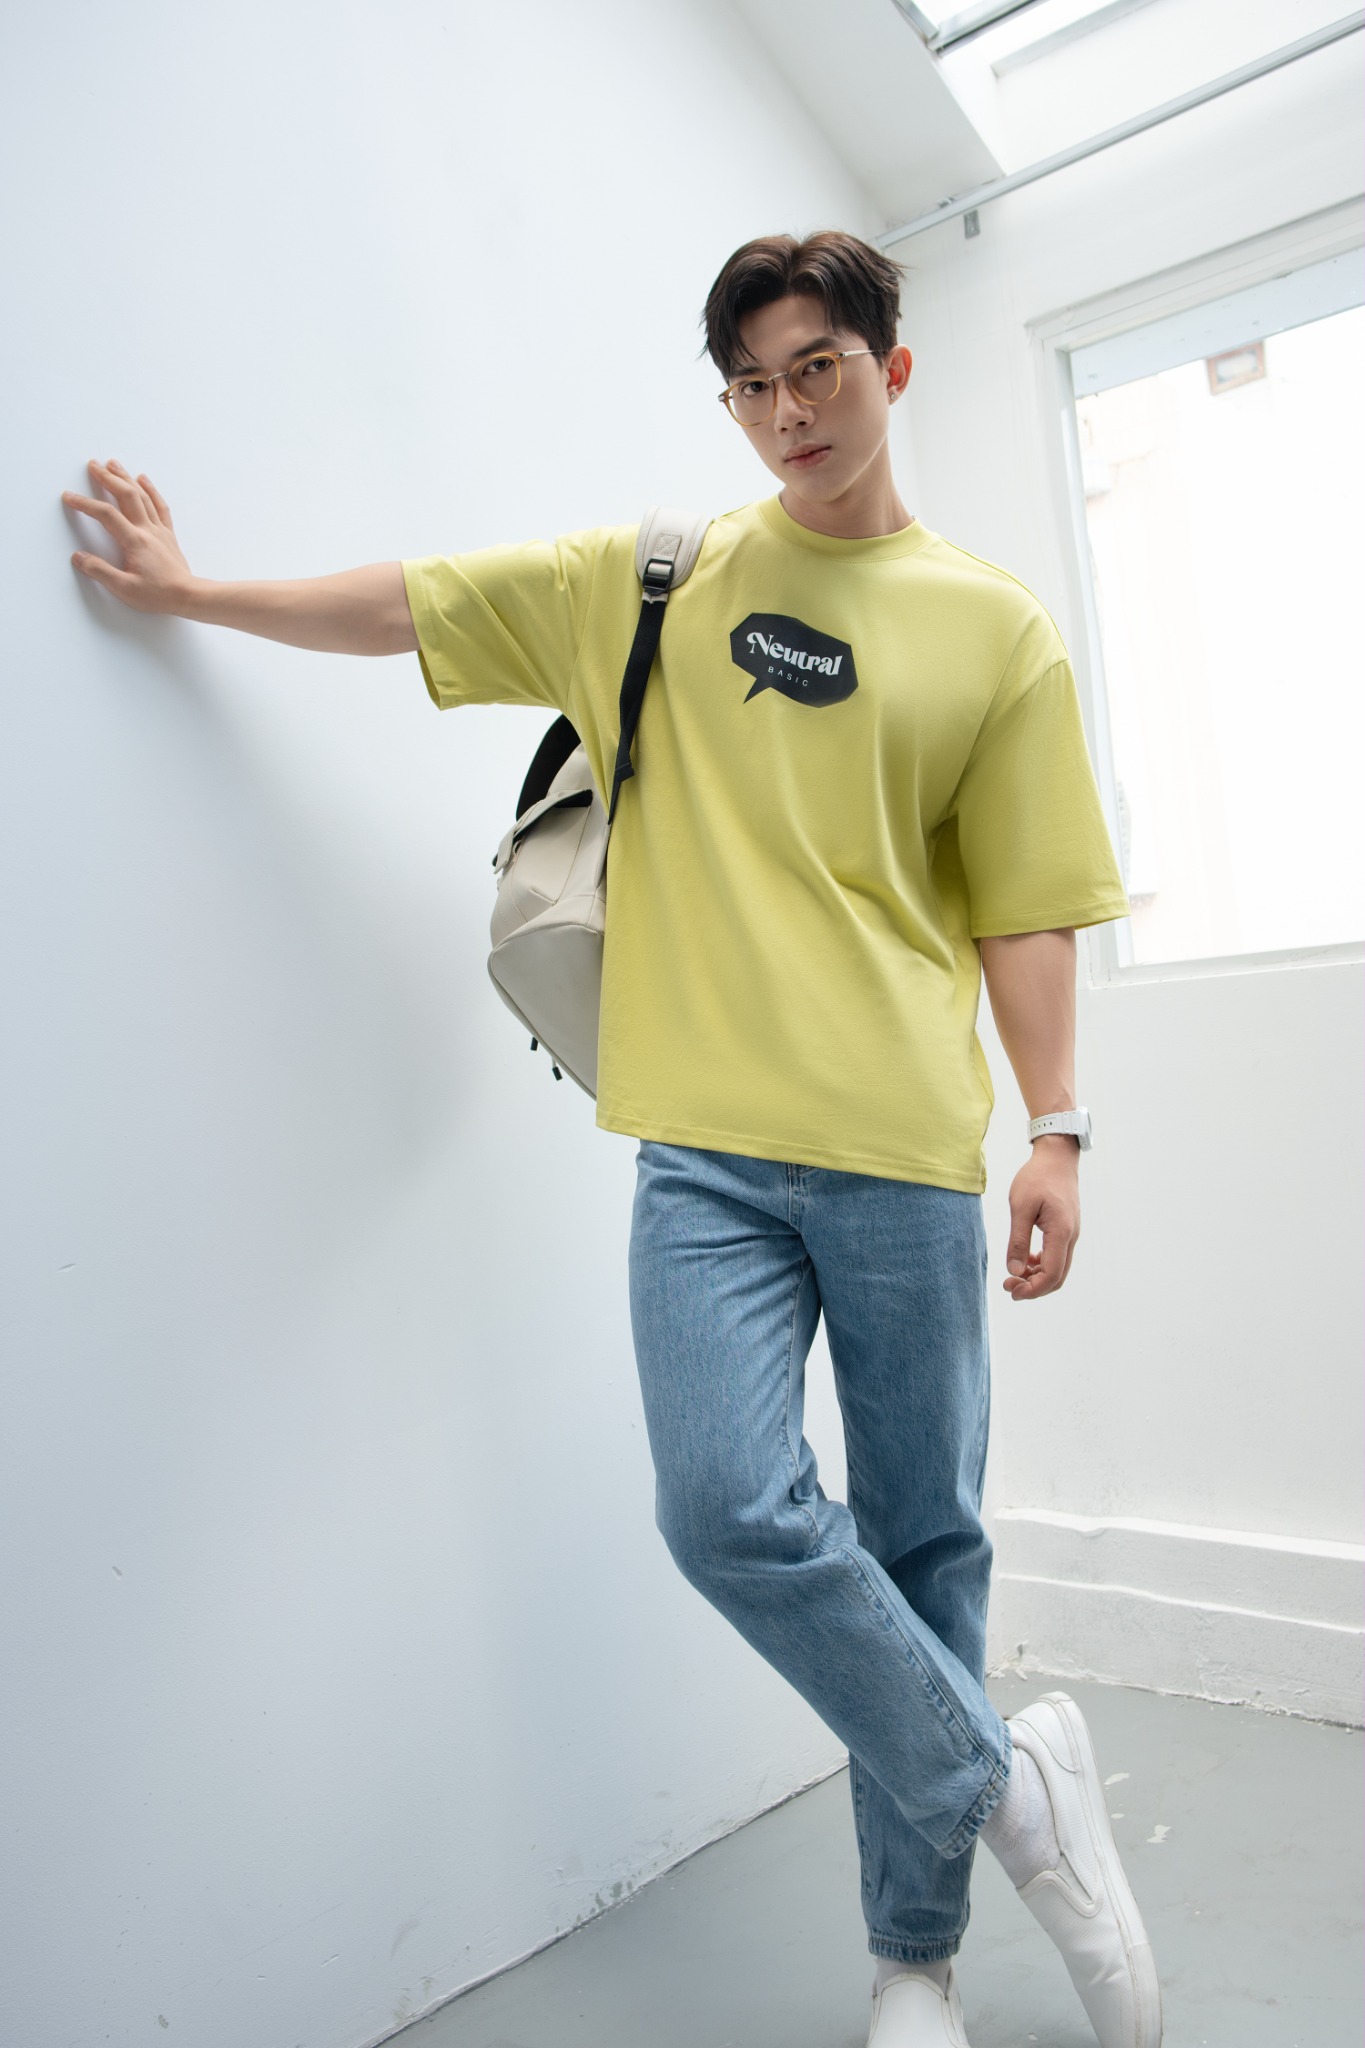 AG688 FACTORY OVERSIZE PRINTED "NEUTRAL" T-SHIRT - YELLOW